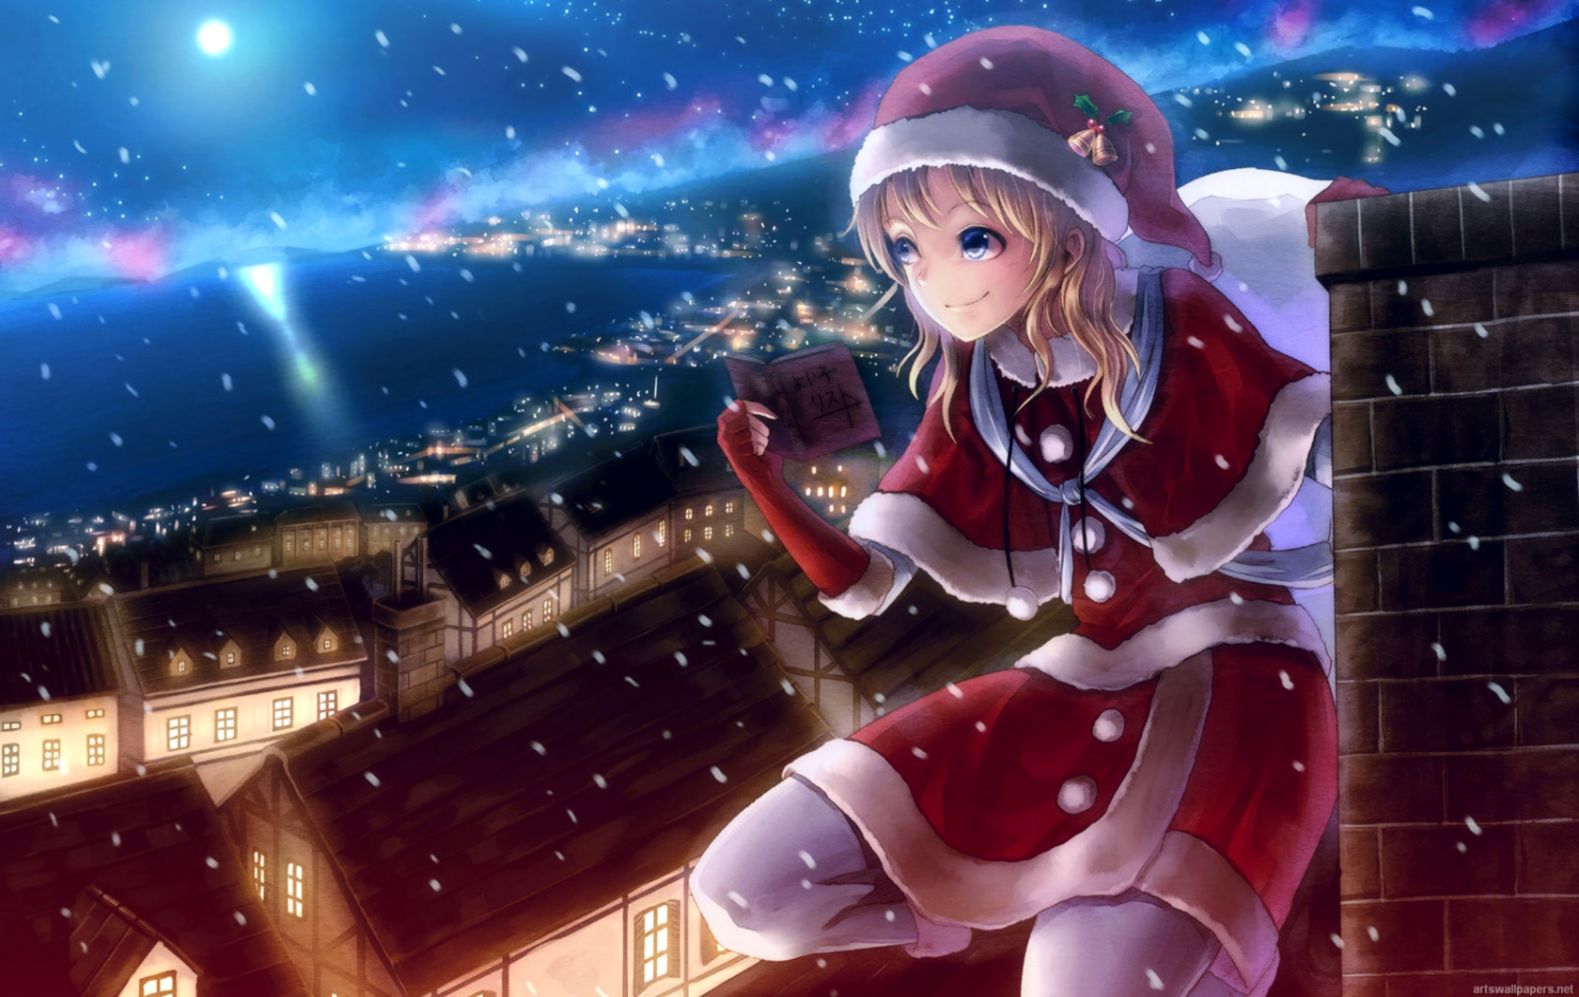 Free Cute Anime Girl In Christmas Picture Wallpapers Hd